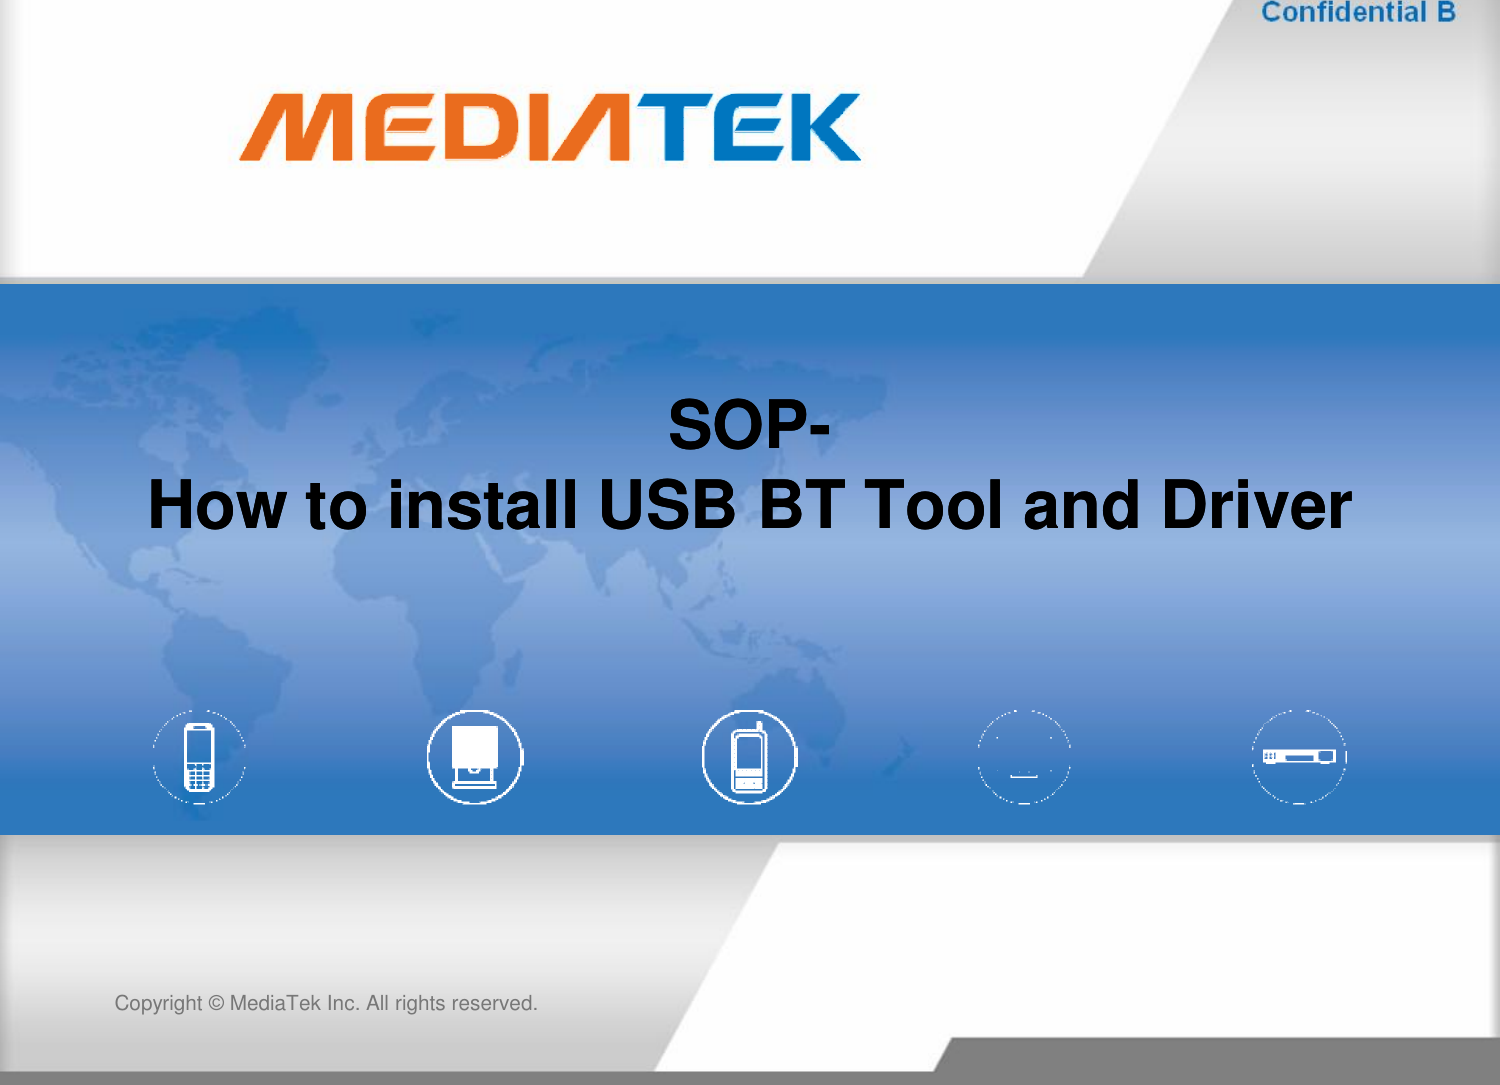 SOPSOP--How to install USB BT Tool and DriverHow to install USB BT Tool and DriverCopyright © MediaTekInc. All rights reserved.How to install USB BT Tool and DriverHow to install USB BT Tool and Driver